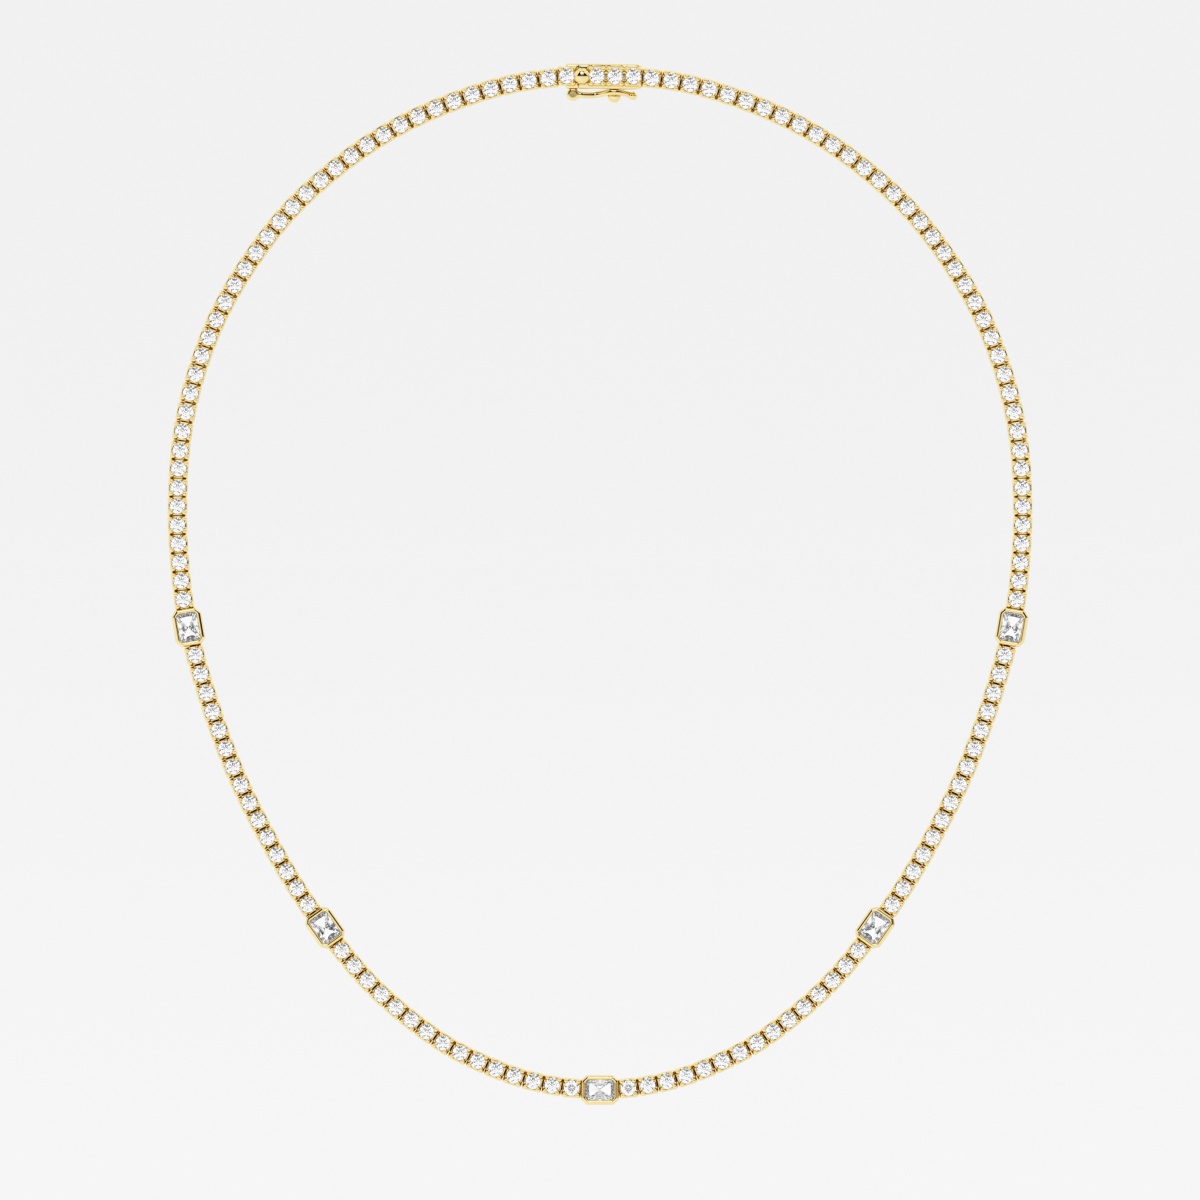 Additional Image 1 for  näas Empowering 8 3/4 ctw Radiant Lab Grown Diamond Station Tennis Necklace